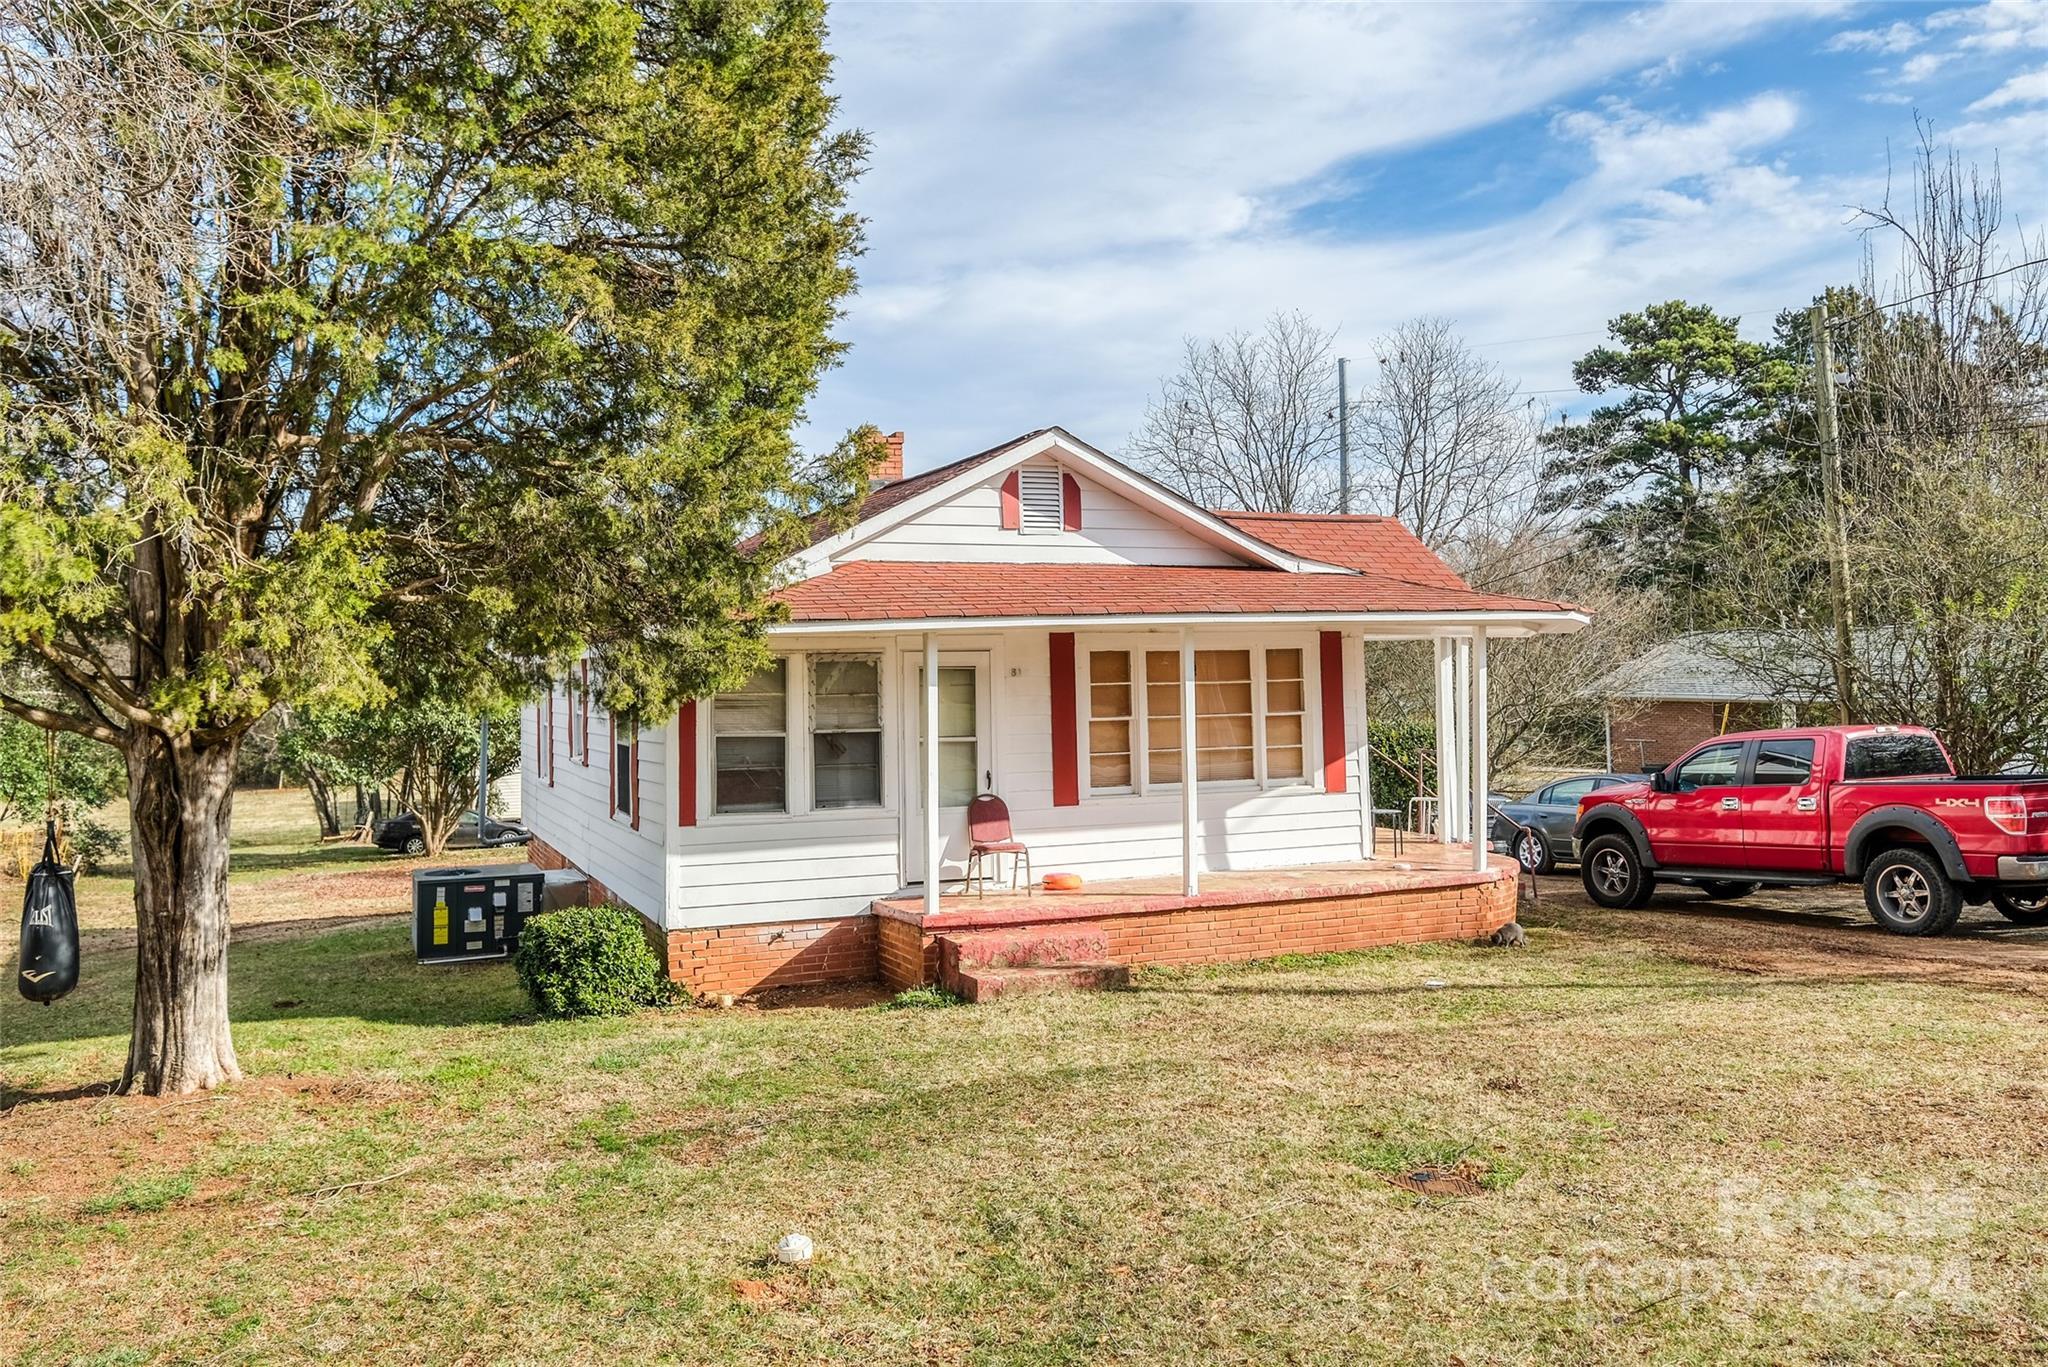 Photo one of 3812 Sarah Nw Dr Concord NC 28027 | MLS 4105303